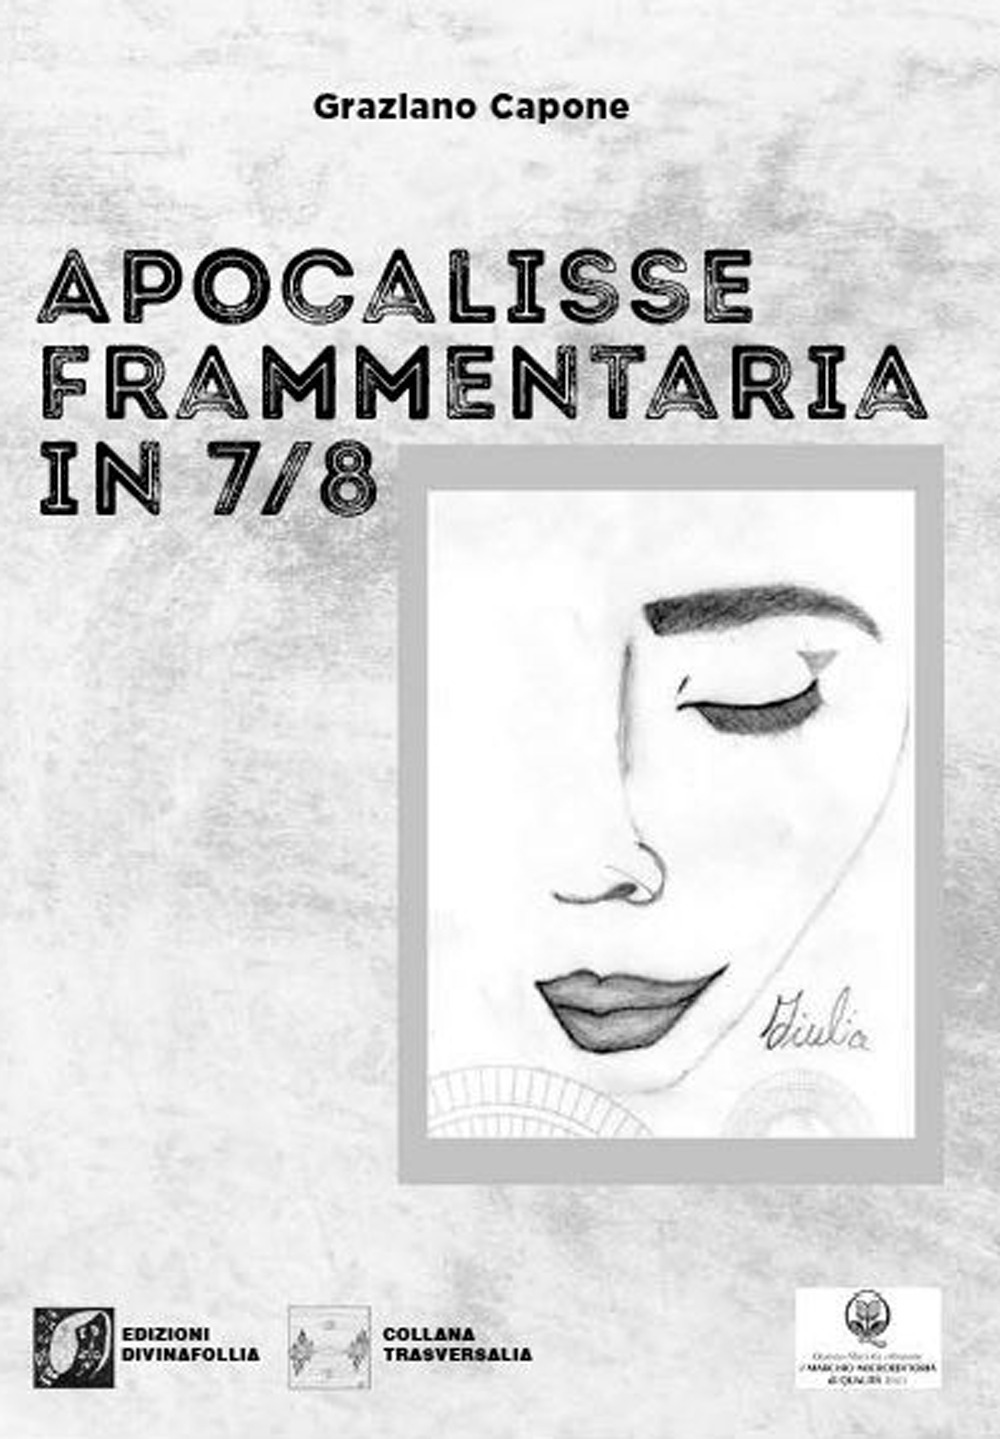 Apocalisse frammentaria in 7/8